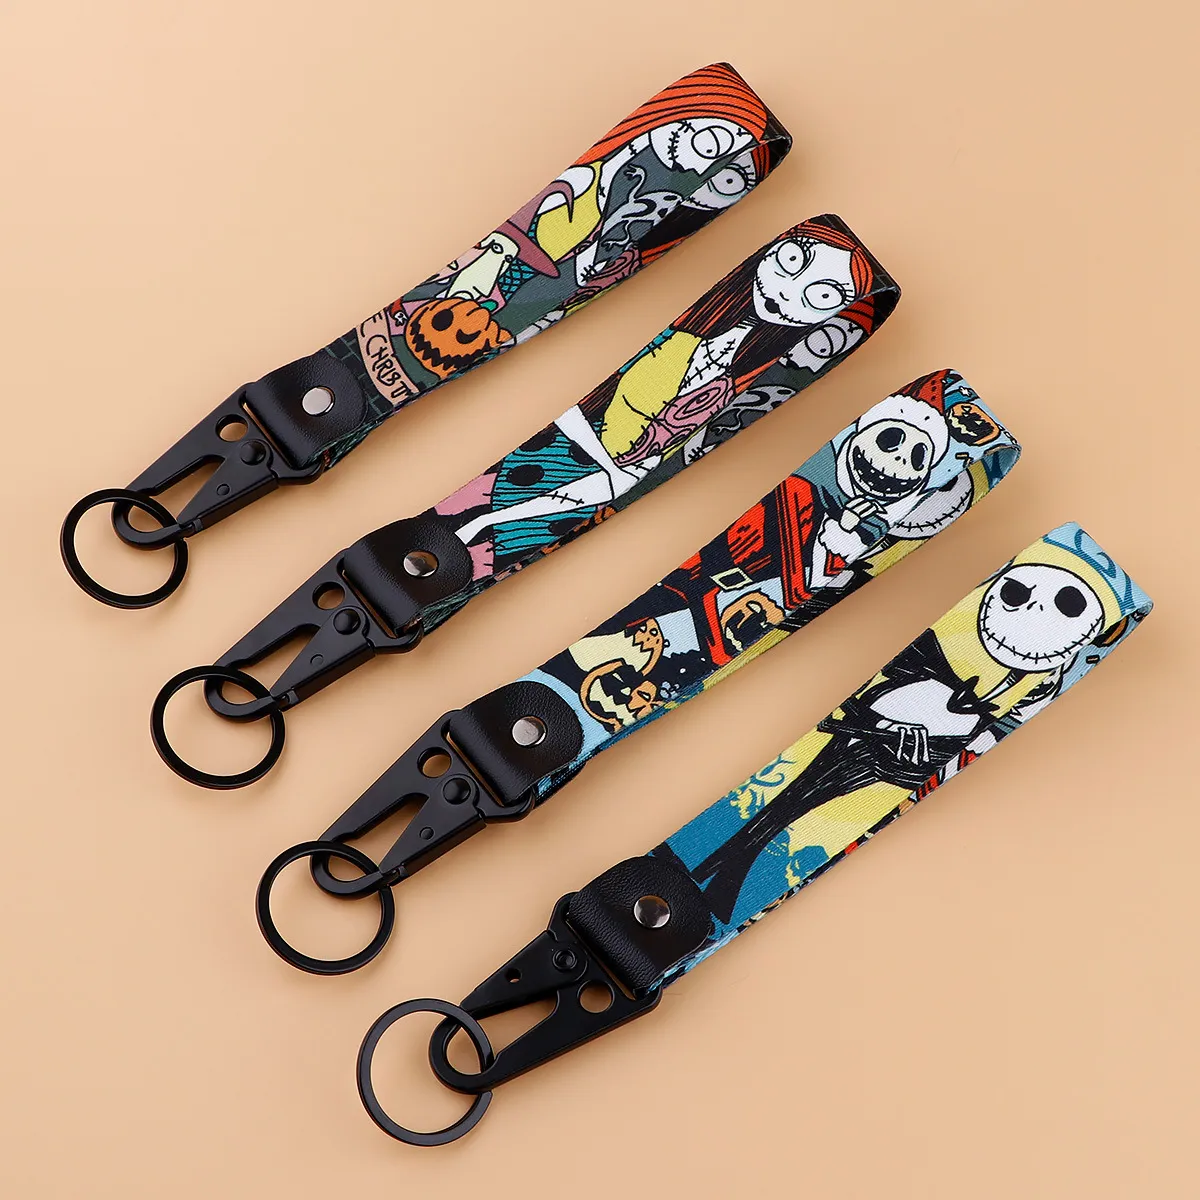 Keychains & Lanyards Various Types Of Cartoon Cool Key Tag Embroidery Fobs For Motorcycles Cars Bag Backpack Keychain Fashion Ring Gi Ot2Ex